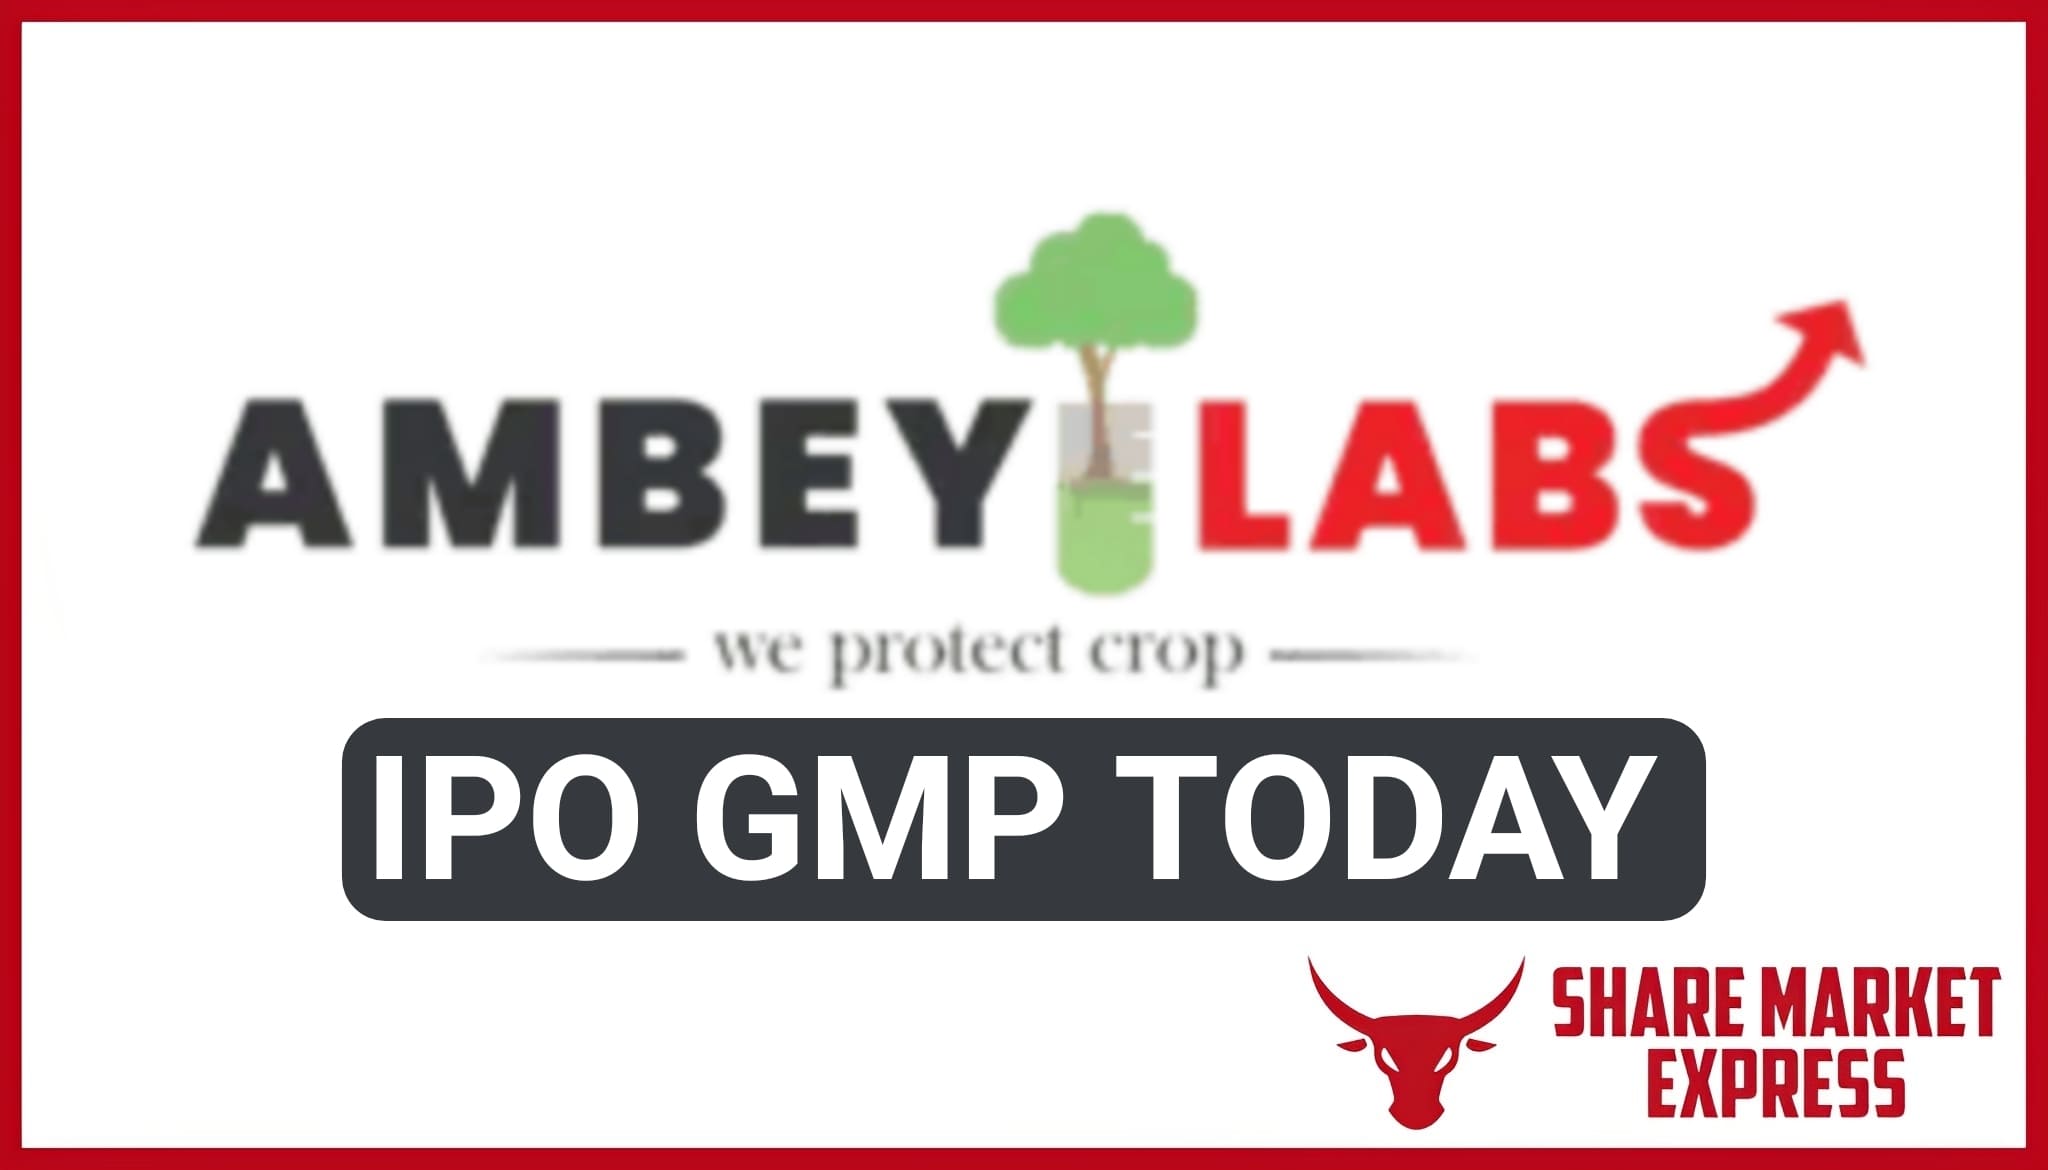 Ambey Laboratories IPO GMP Today